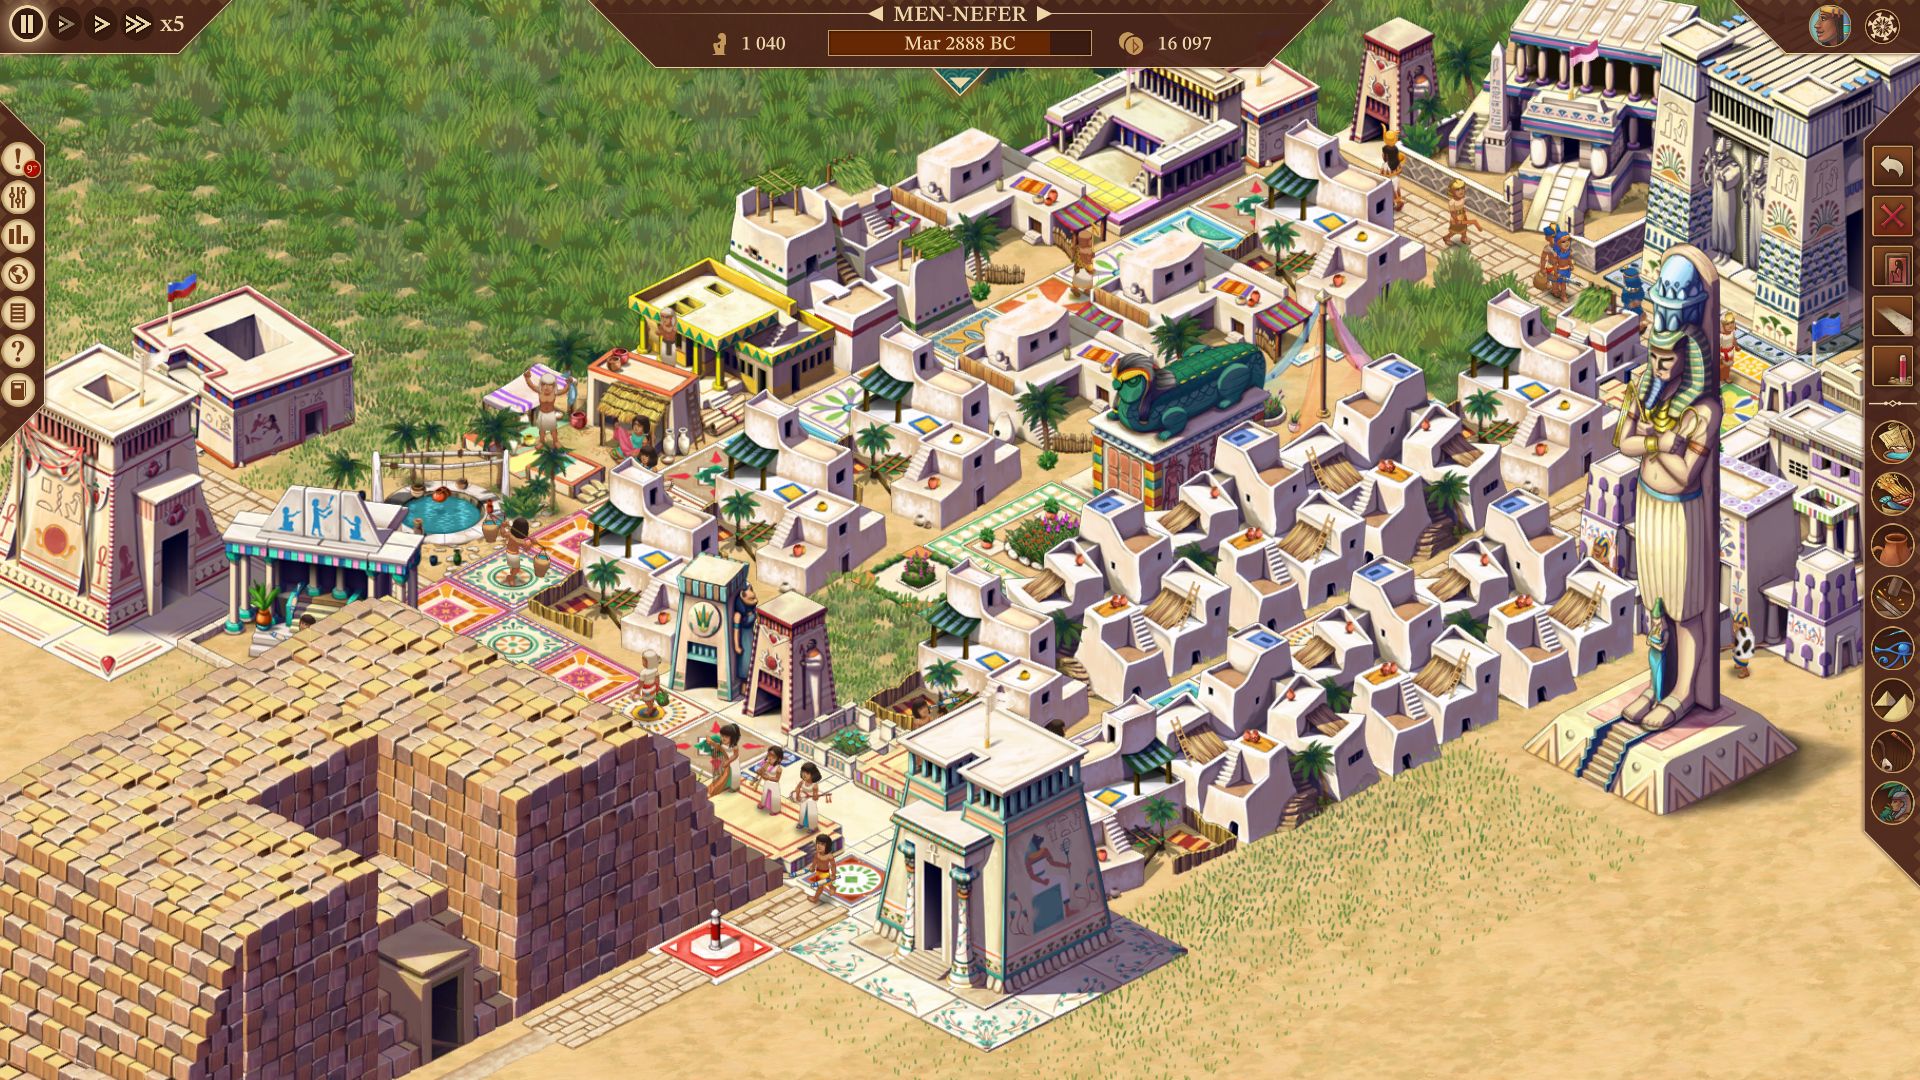 A dense but very prosperous city in Pharaoh: A New Era, with high quality housing, statues, and a completed tomb